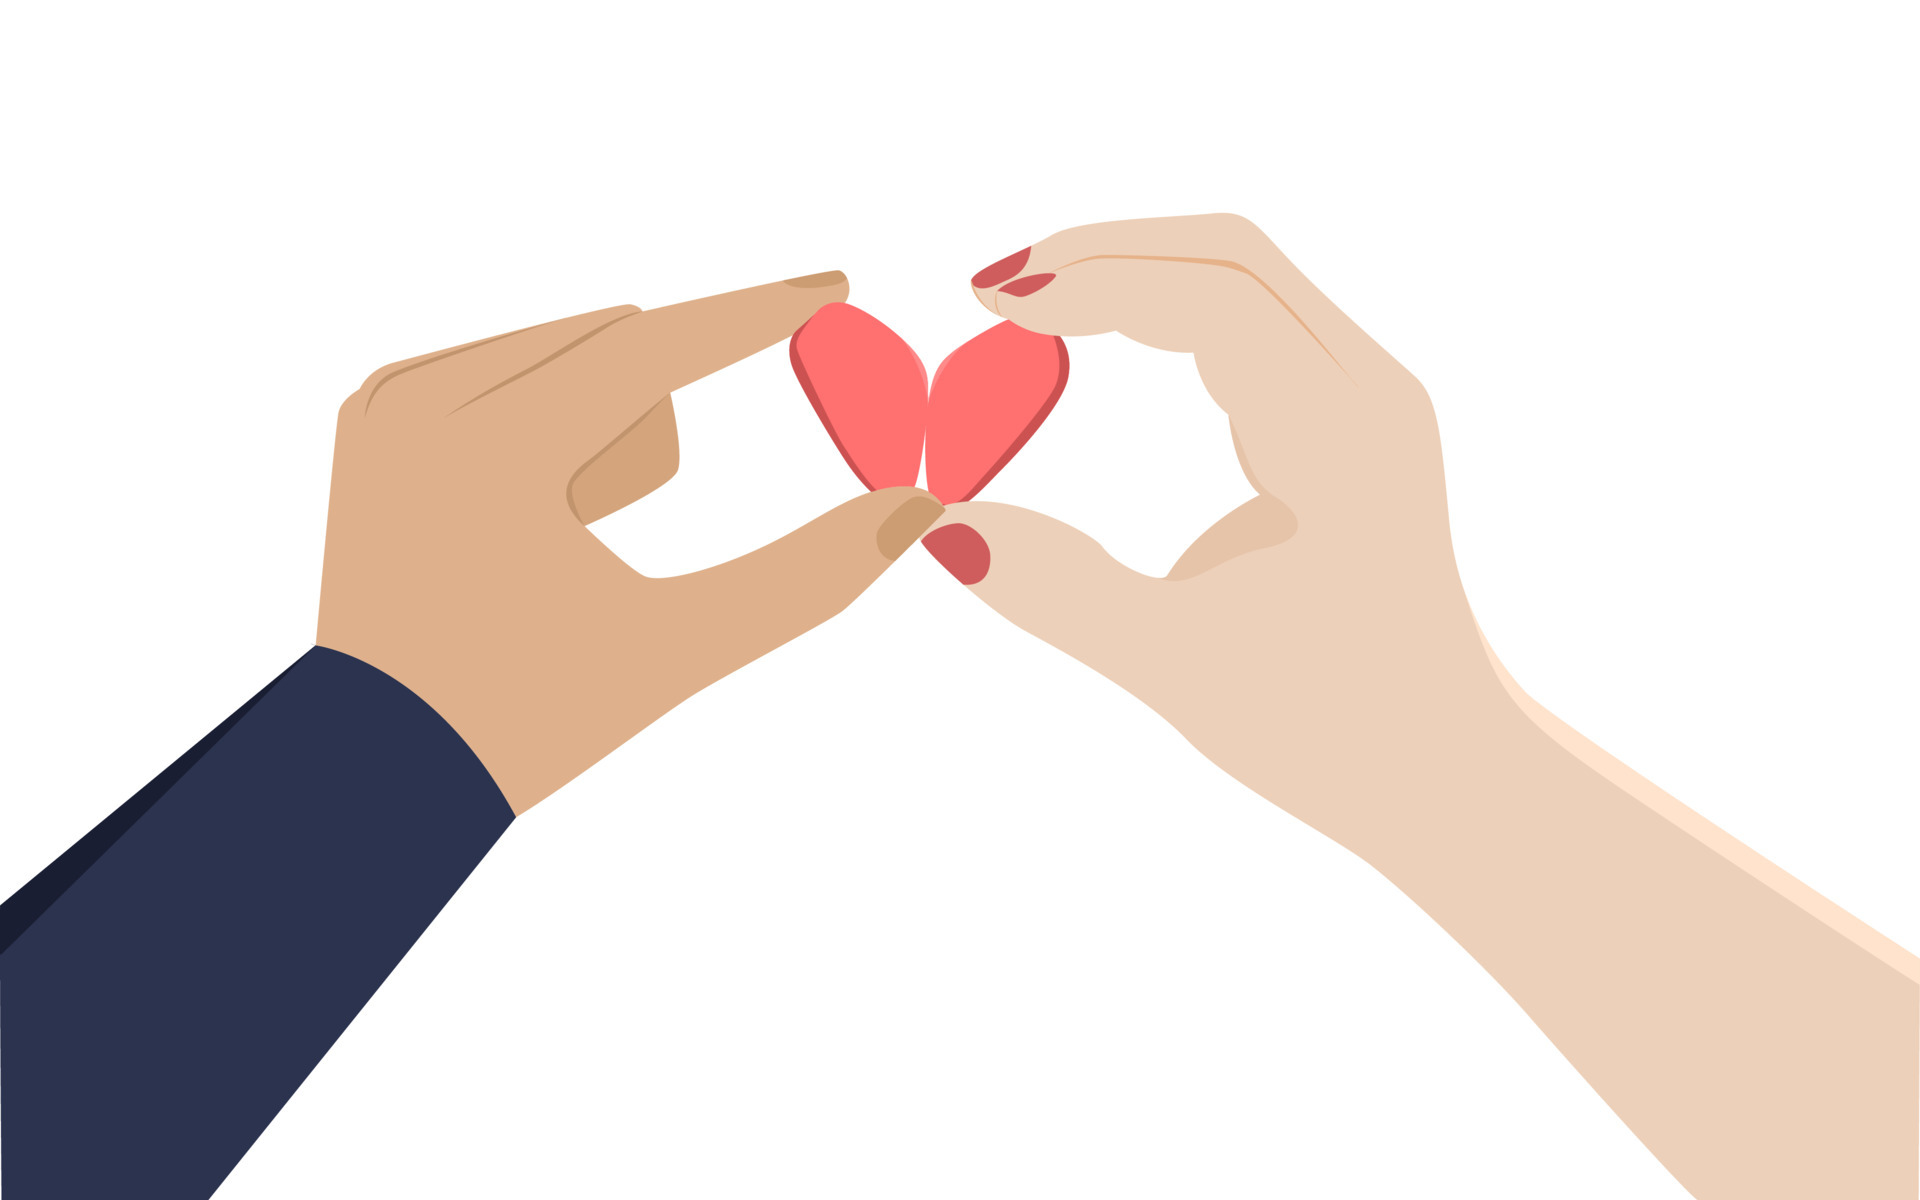 Two hands holding two half heart shape objects, happy romantic couple vector illustration